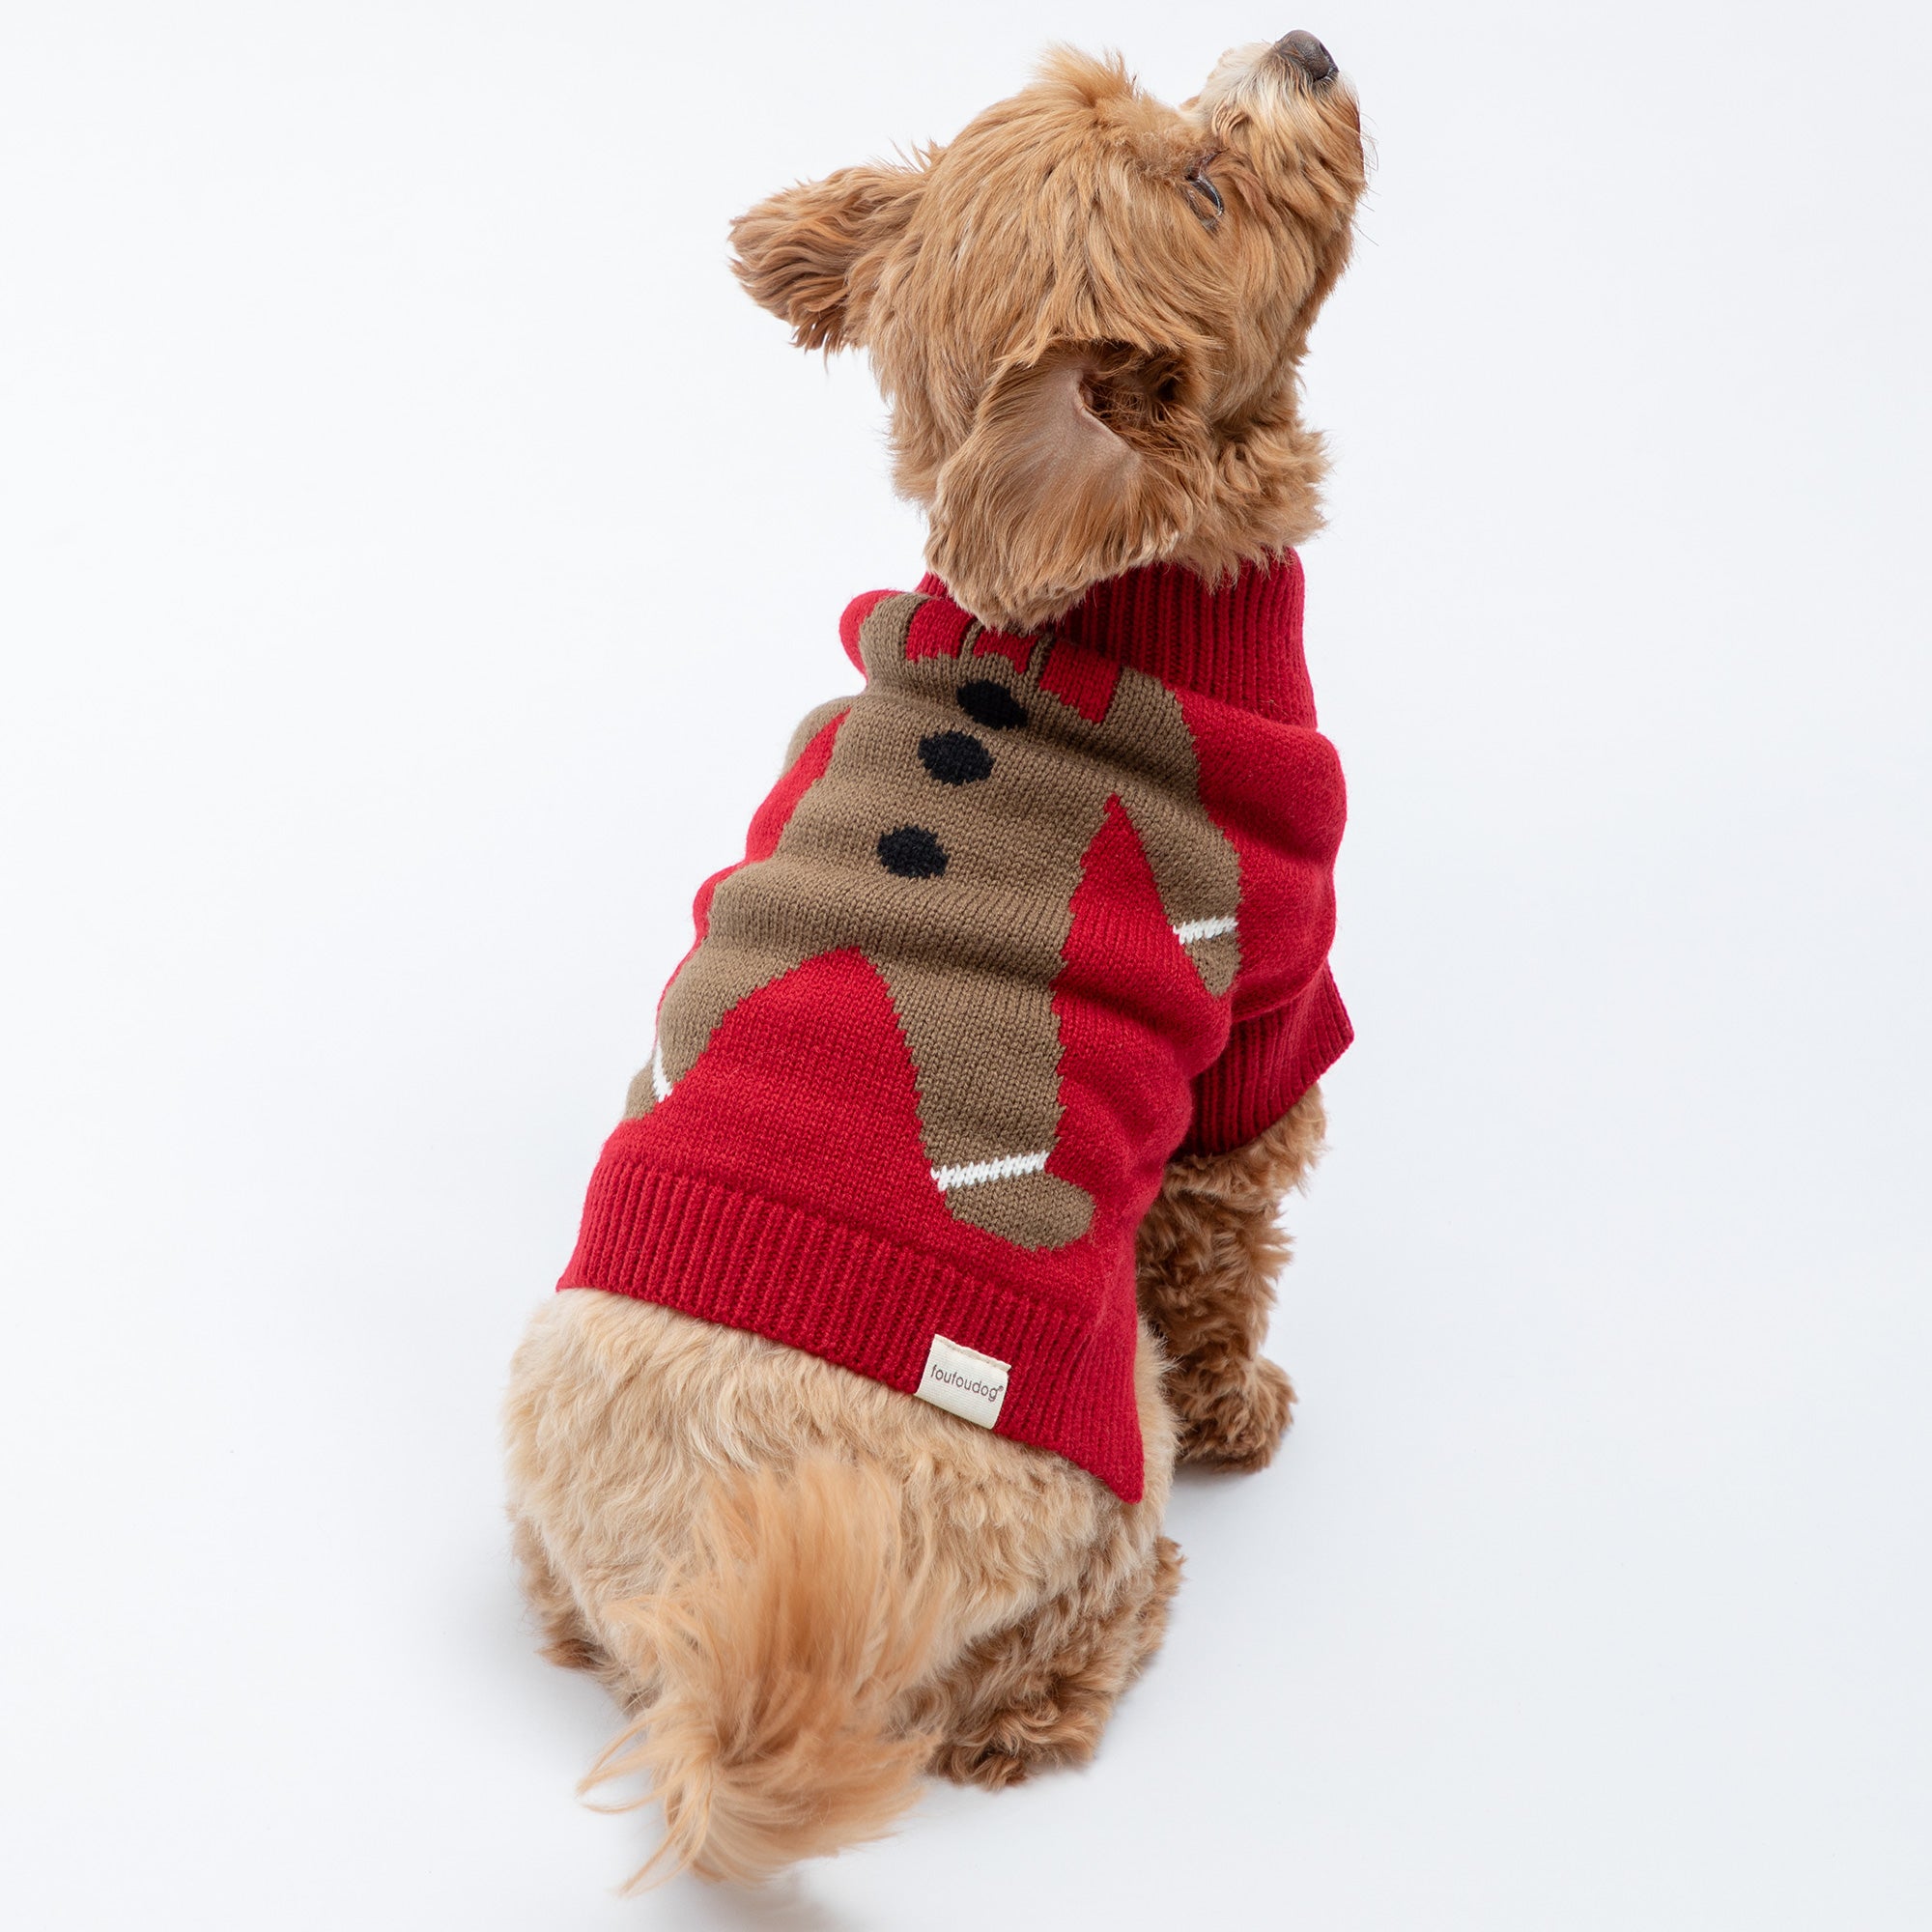 Cozy Christmas Pet Sweater - Gingerbread - XL